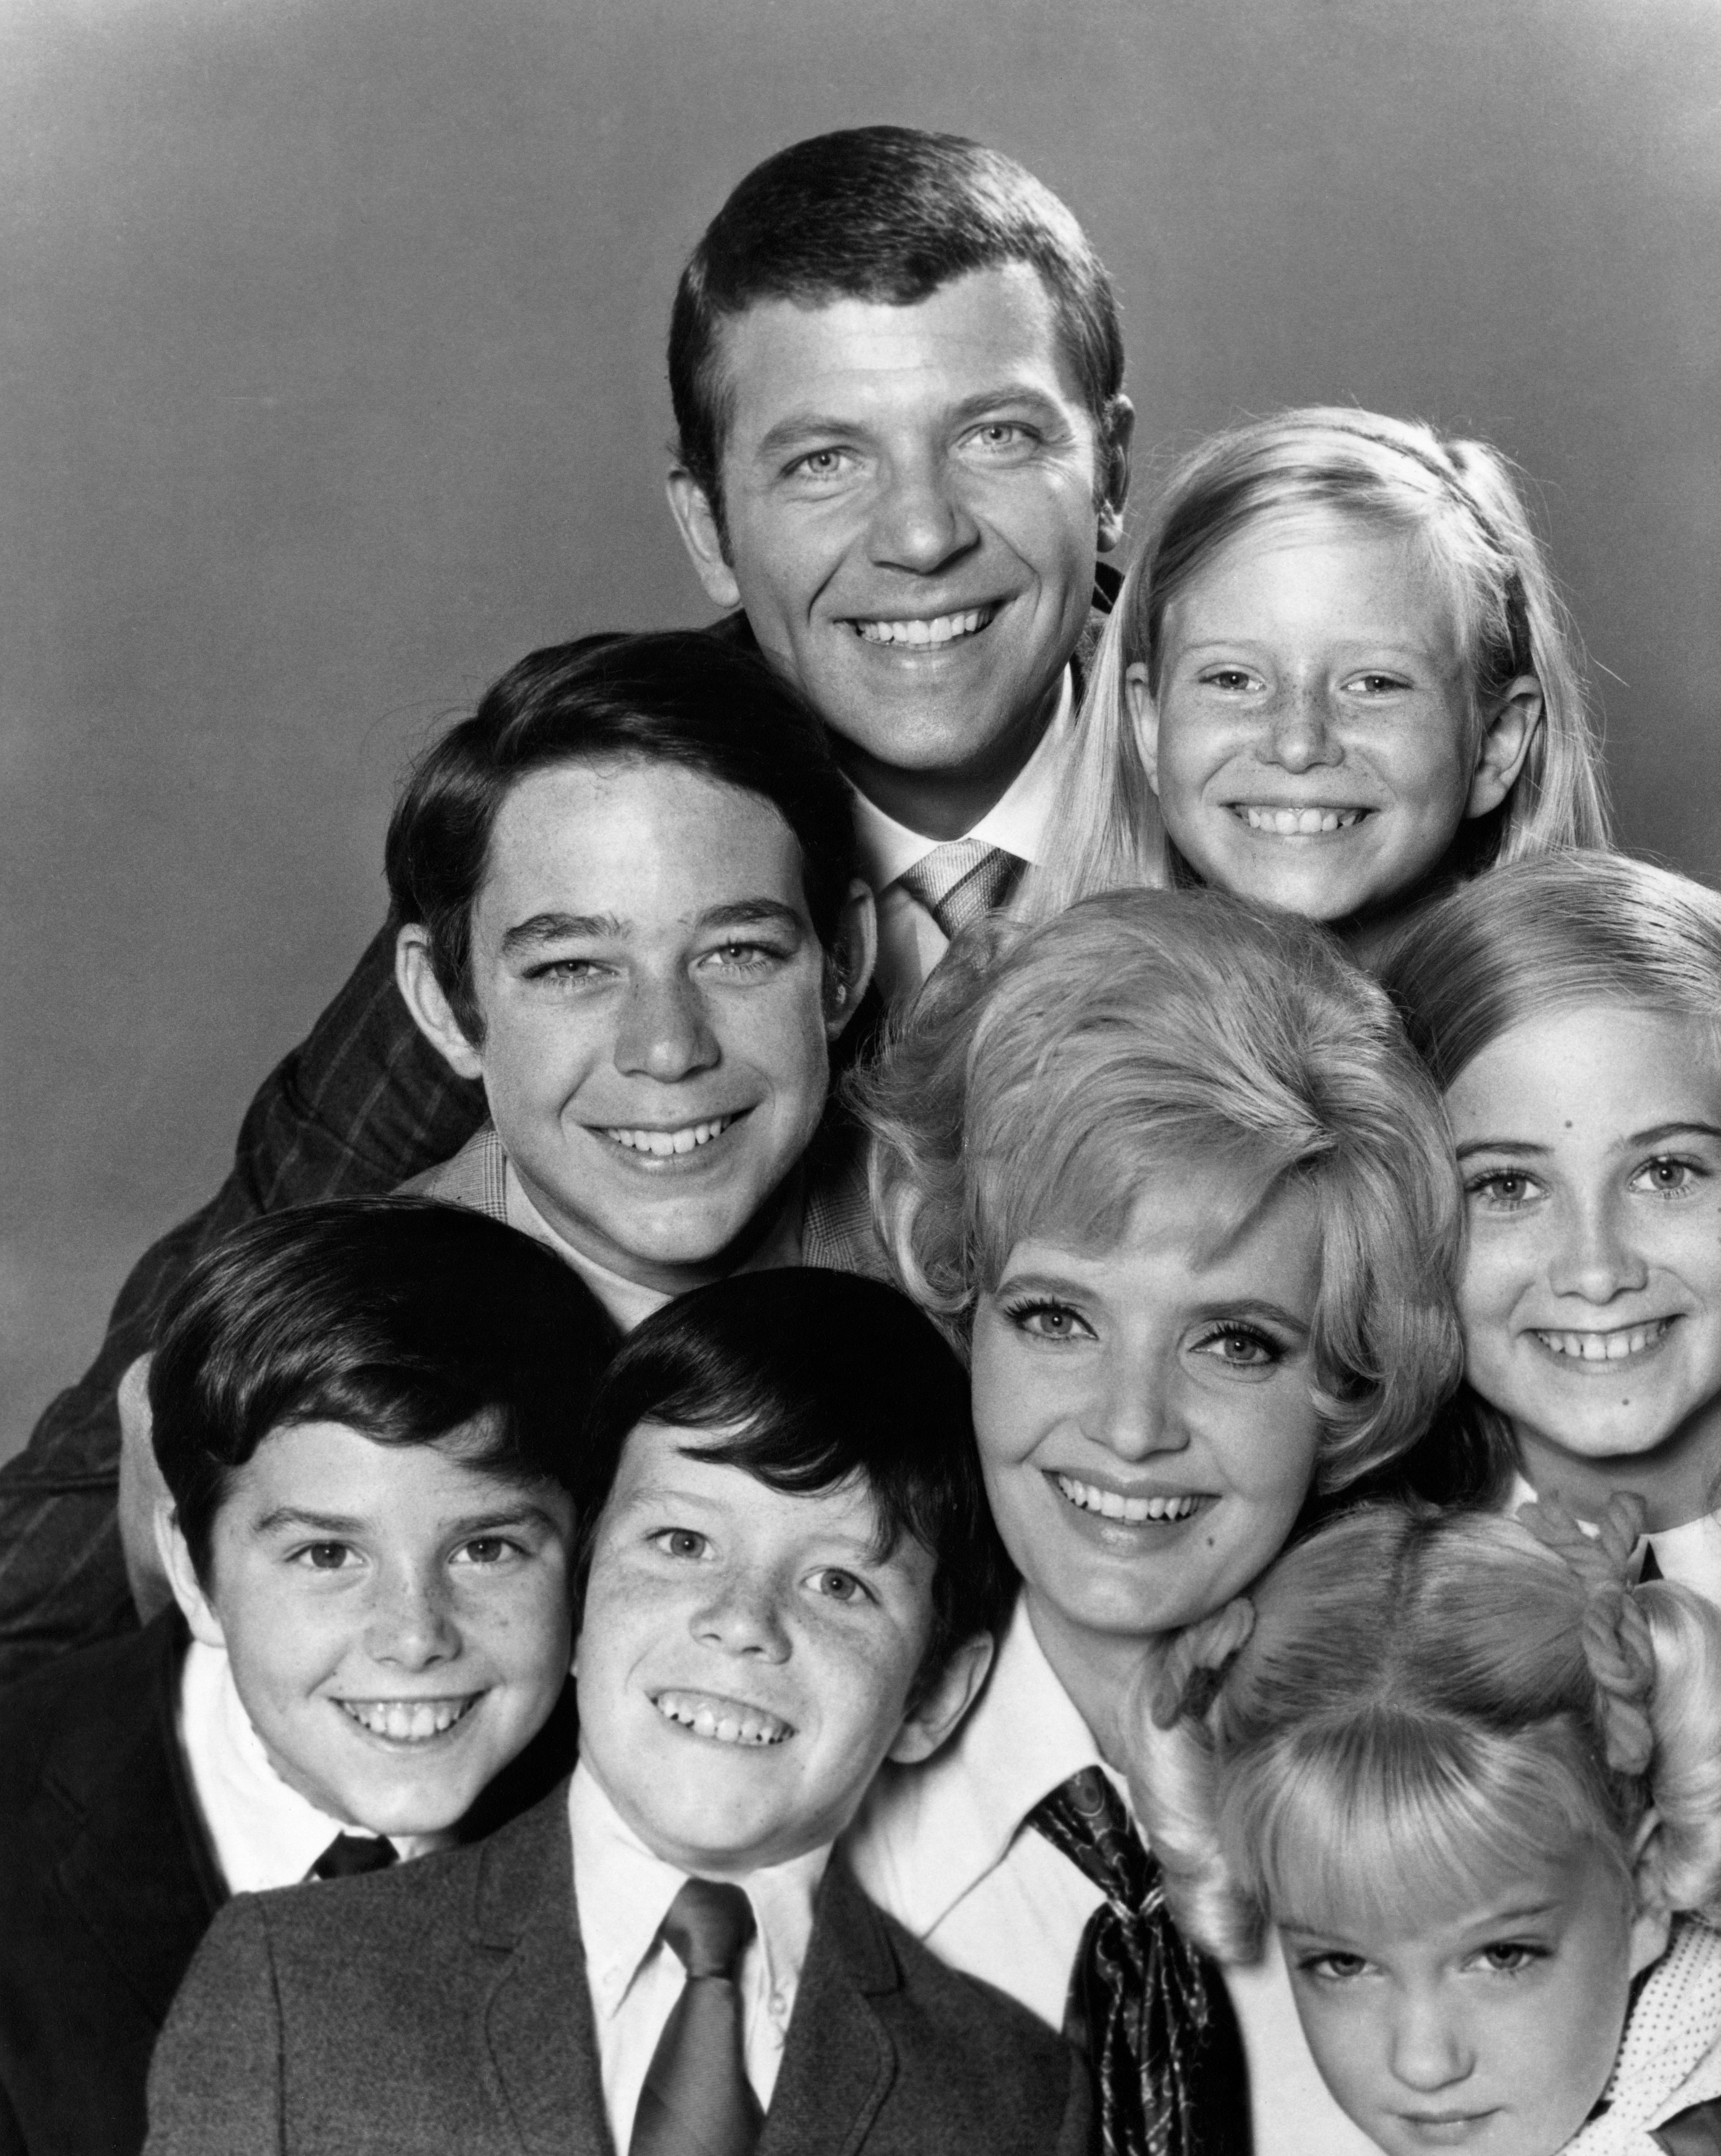 The entire cast of "The Brady Bunch" including Robert Reed as Mike Brady in 1969 | Source: Getty Images